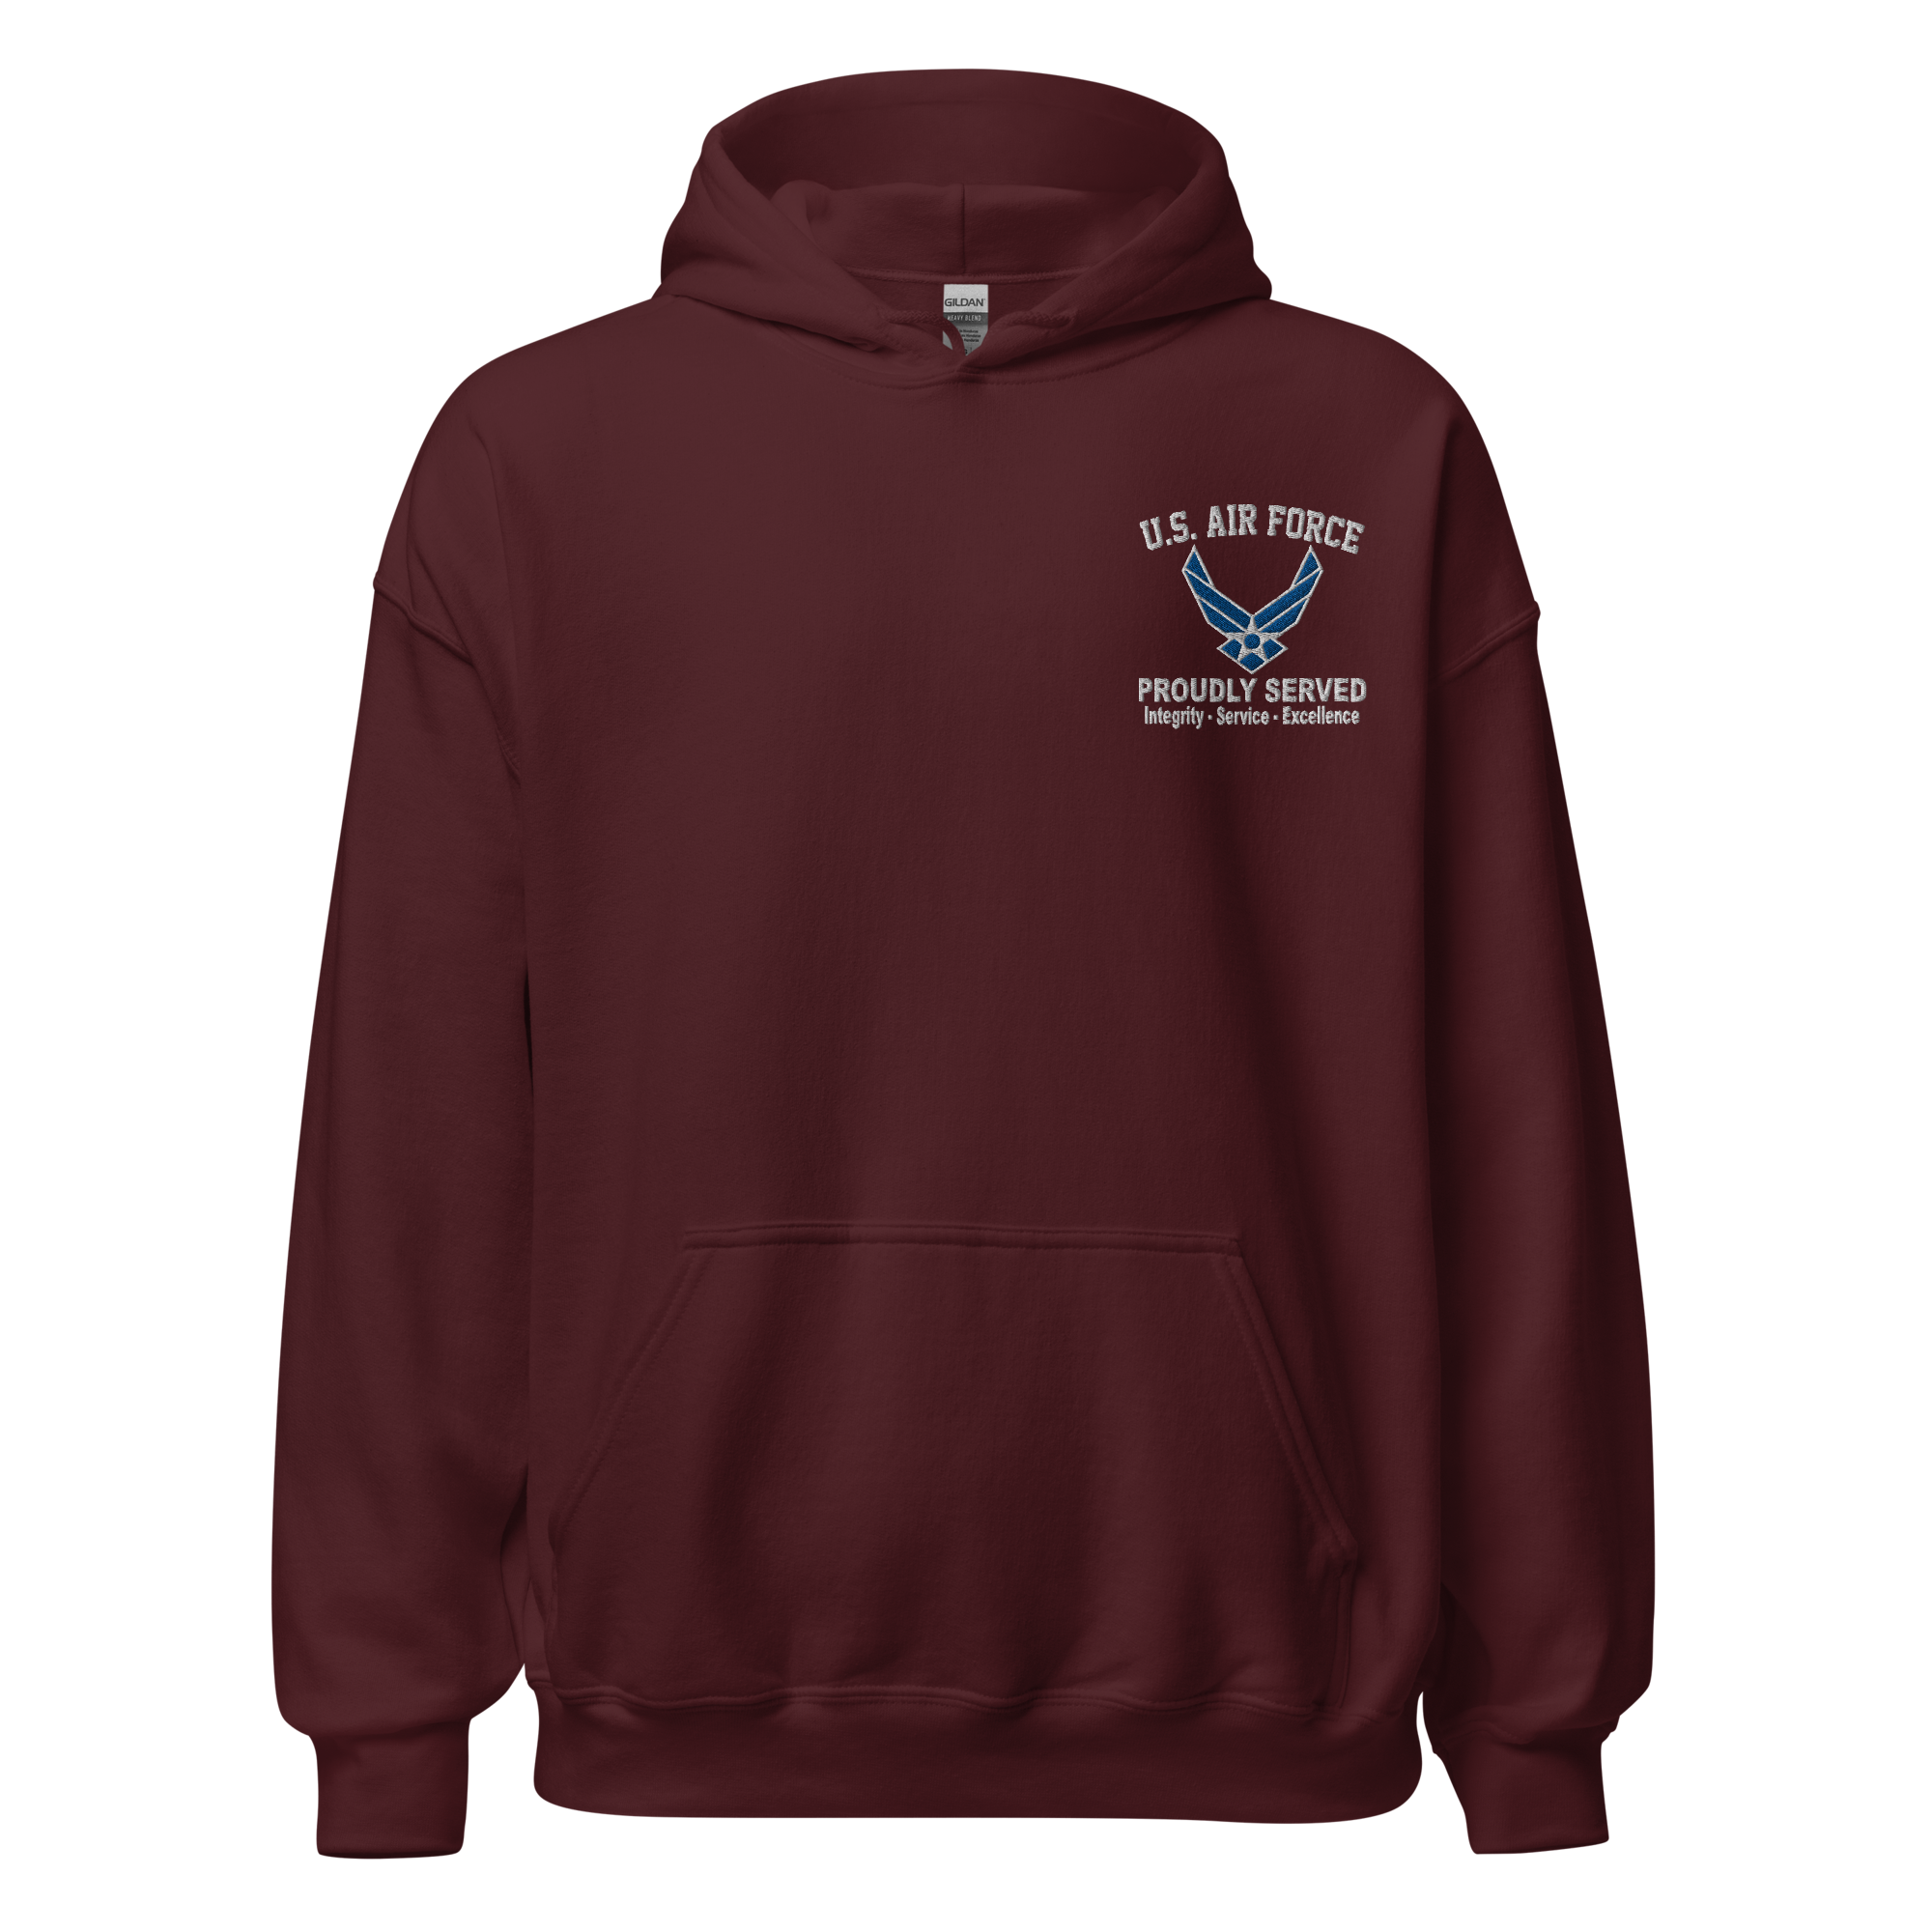 Custom US Air Force Ranks, Insignia Core Values Embroidered Unisex Hoodie